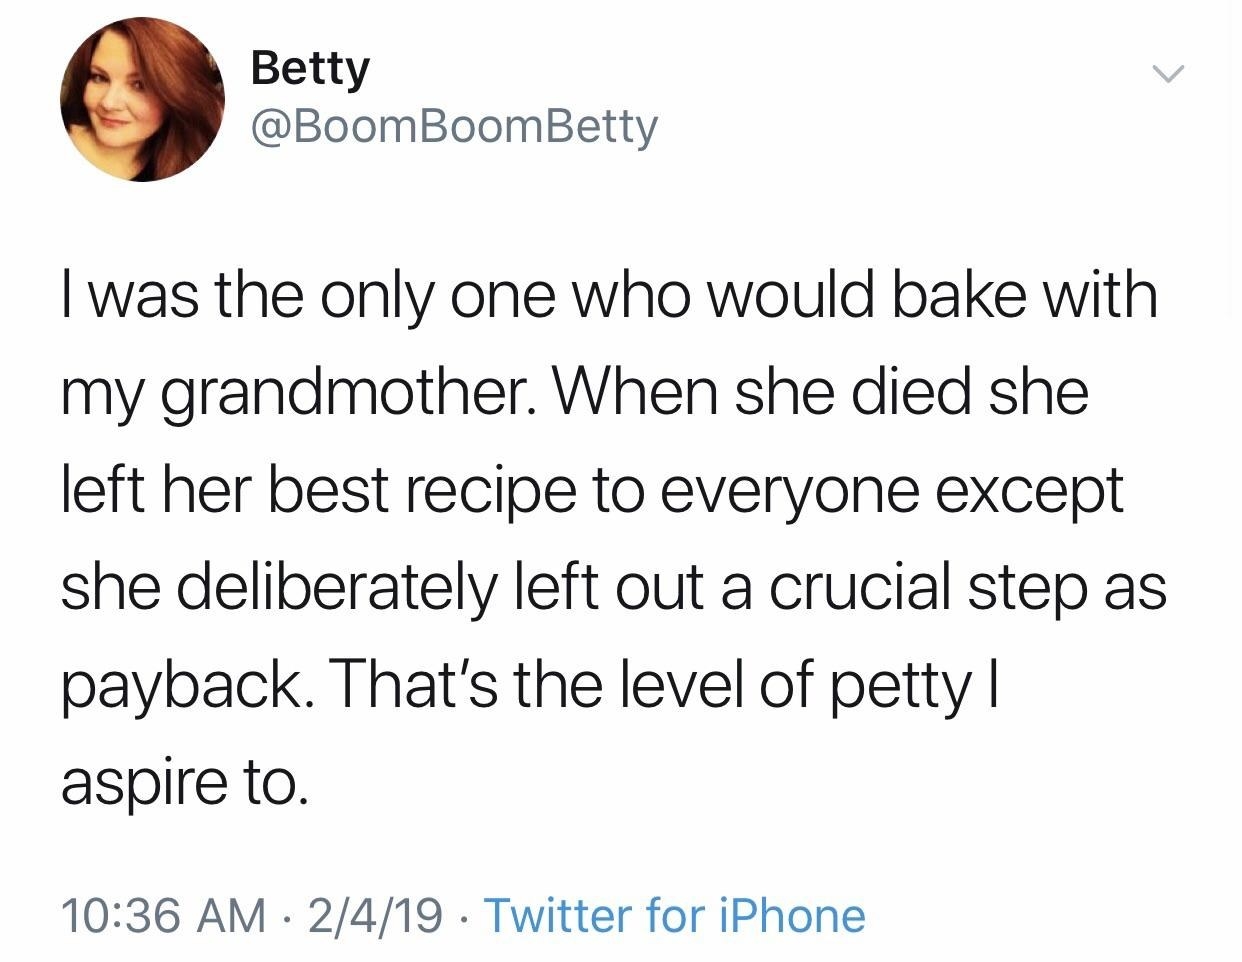 tweet about a grandma leaving out pages of a recipe book on purpose